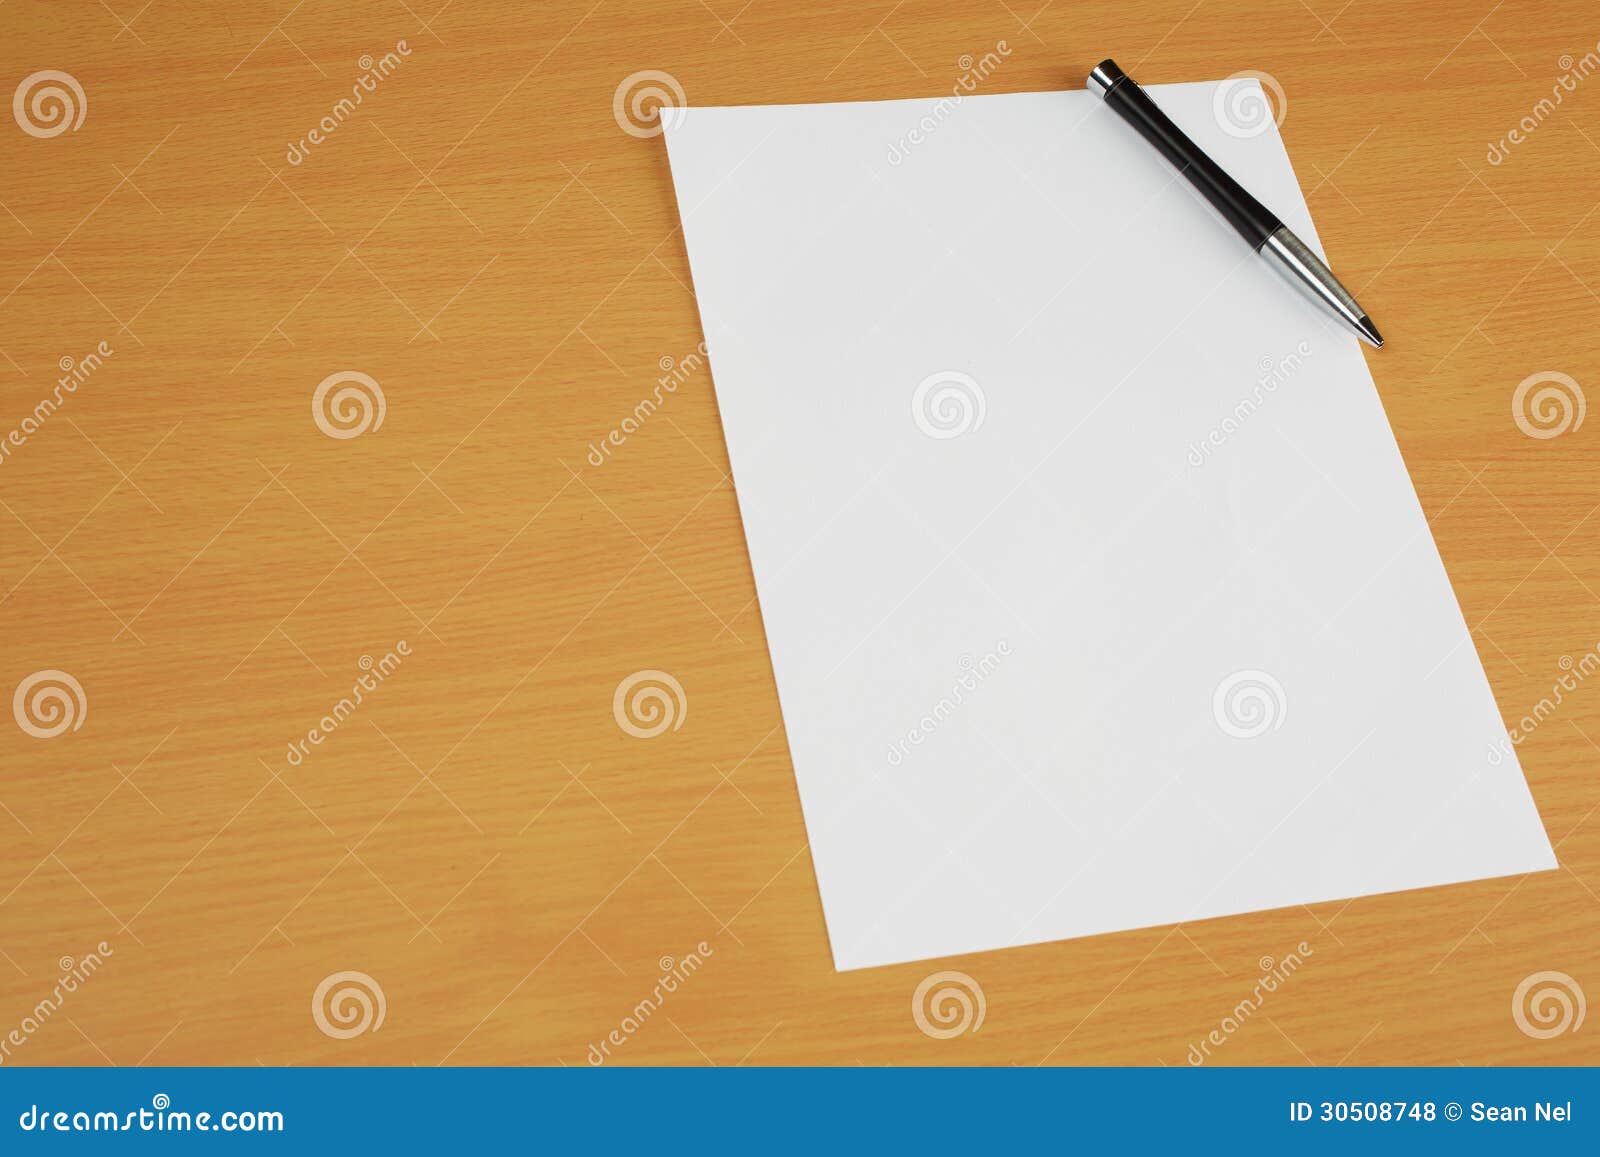 Paper On Desk Royalty Free Stock Photos - Image: 30508748